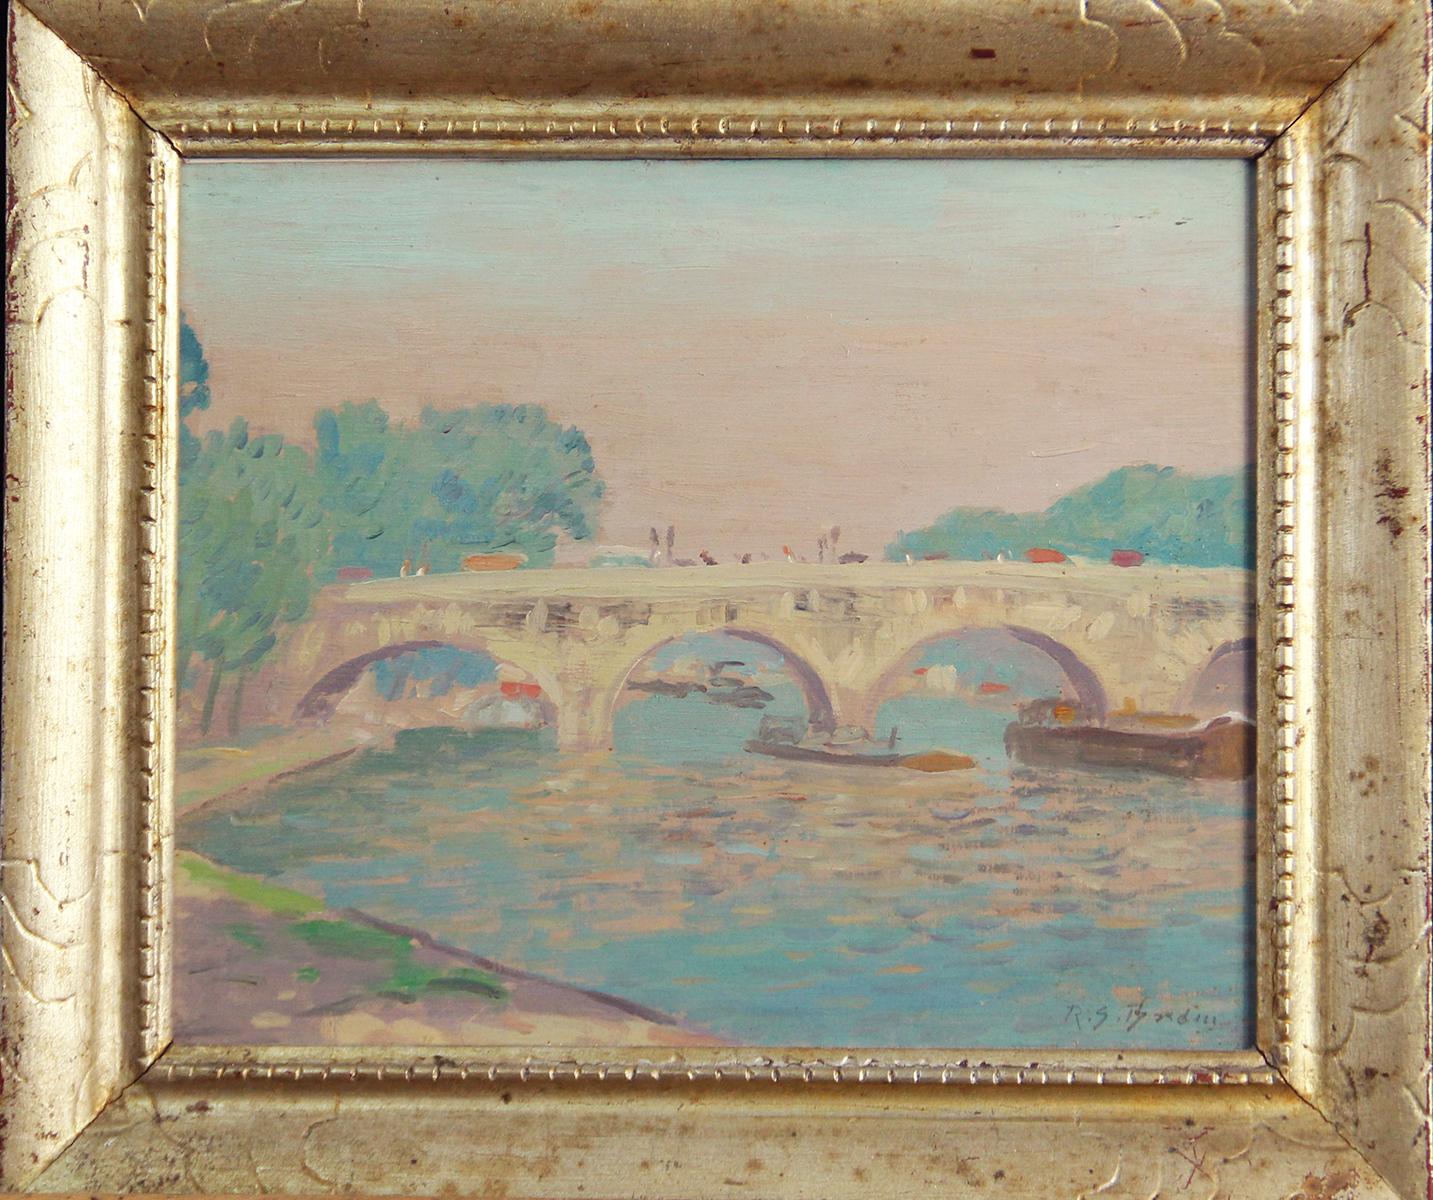 "Bridge Scene" by Rae Sloan Bredin is a 9" x 11" oil on board Impressionist painting, created in France while on his honeymoon. It is signed in the lower right "R. S. Bredin" and comes from the private collection of Dr. Tom Folk . Additional